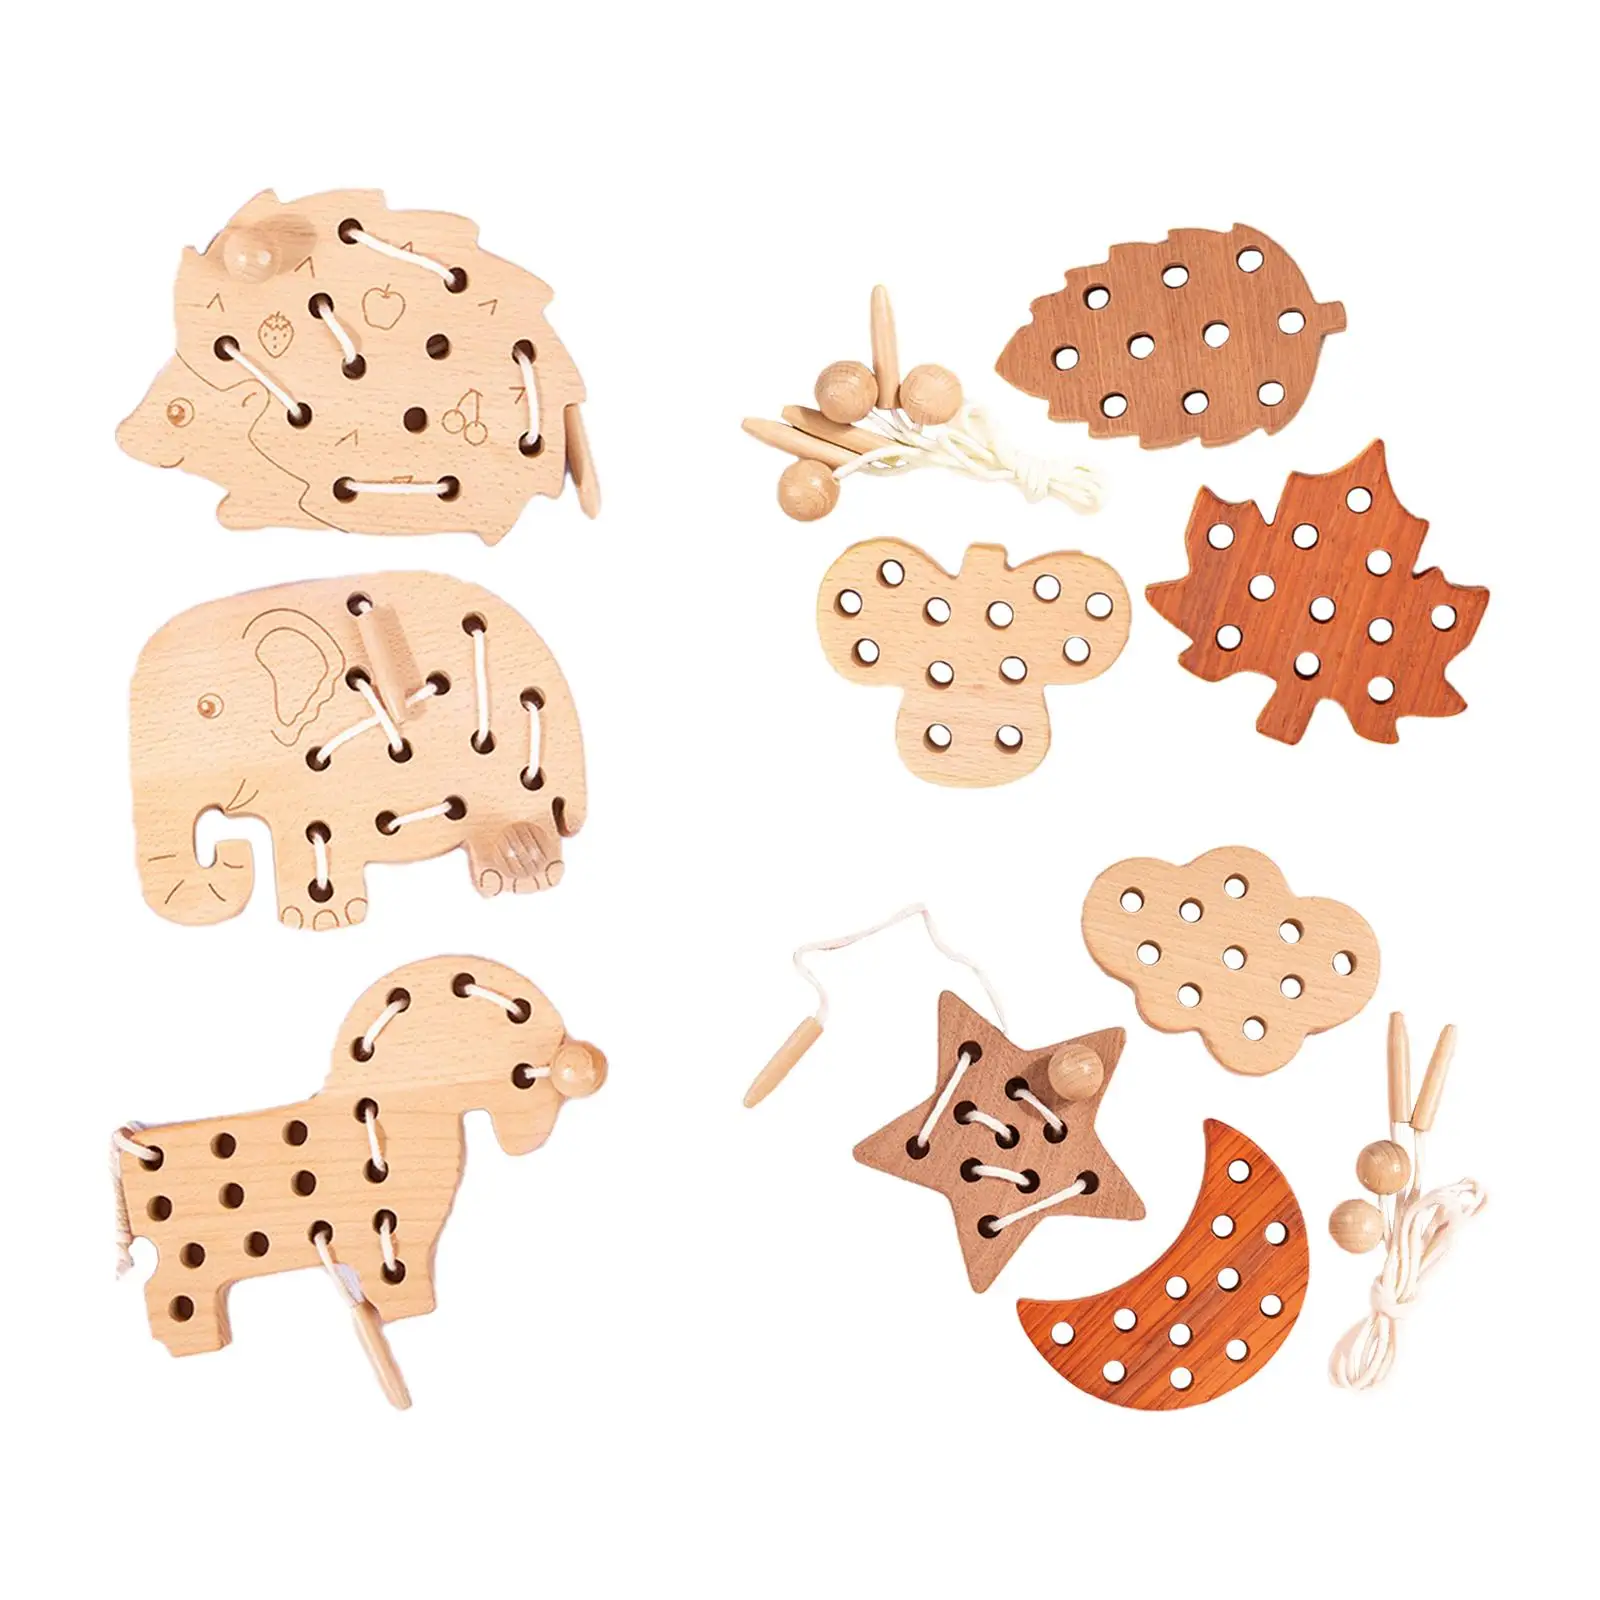 3Pcs Wooden Lacing Threading Toys Activities Board Wood Lace Block Puzzle for Car